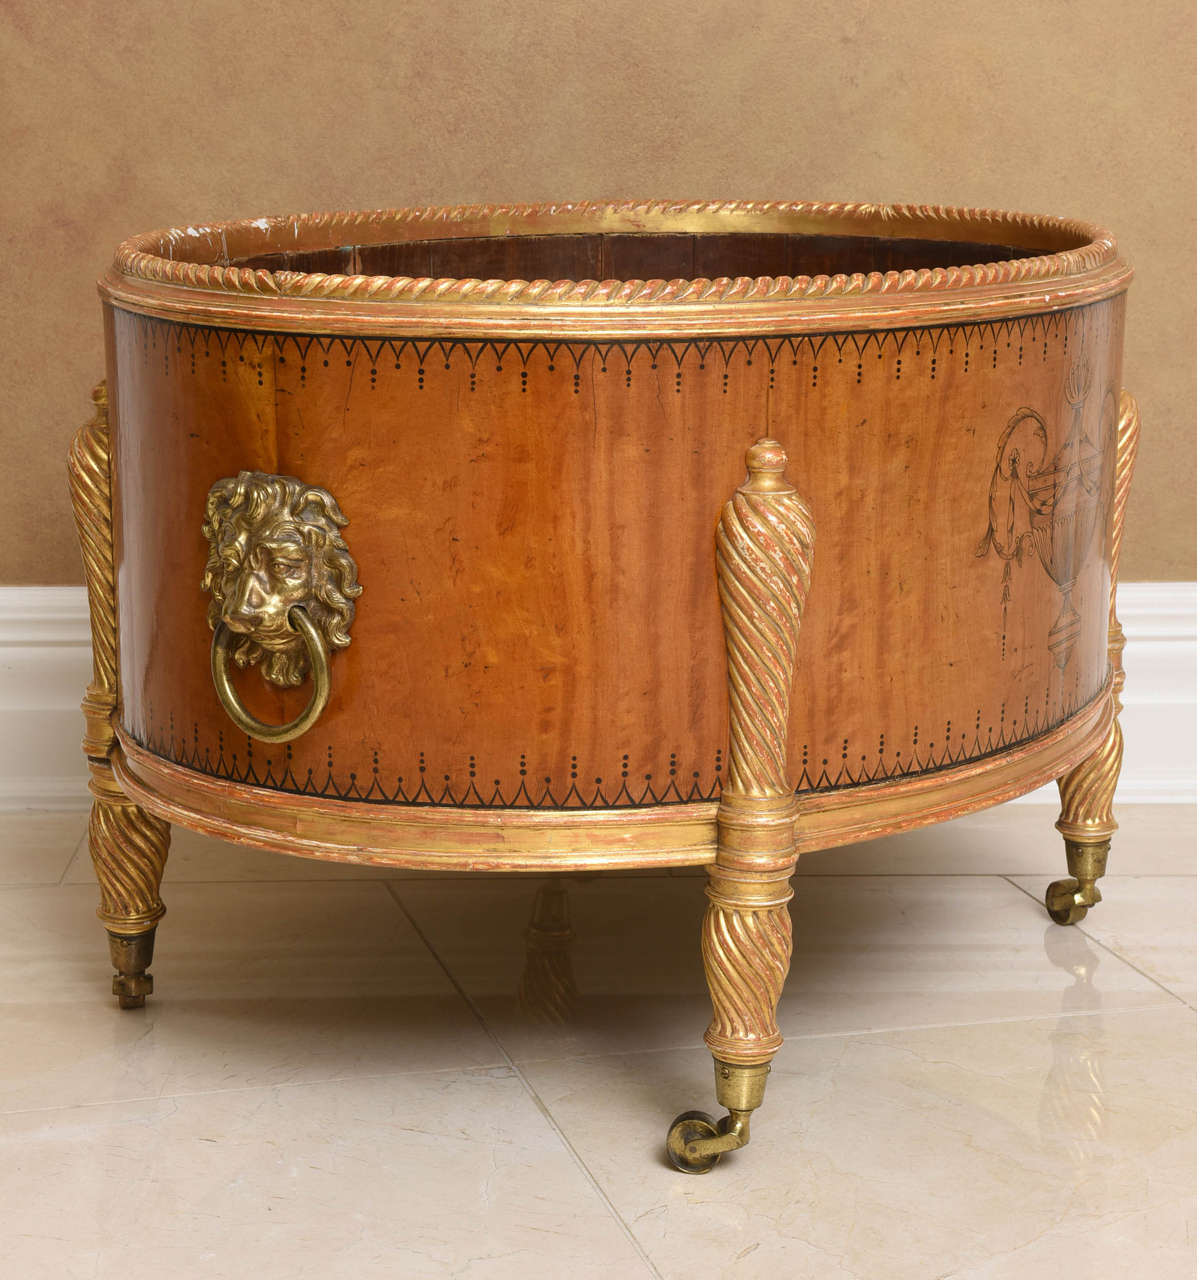 19th Century Large Adam Style Satinwood and Gilt Cellaret or Jardiniere